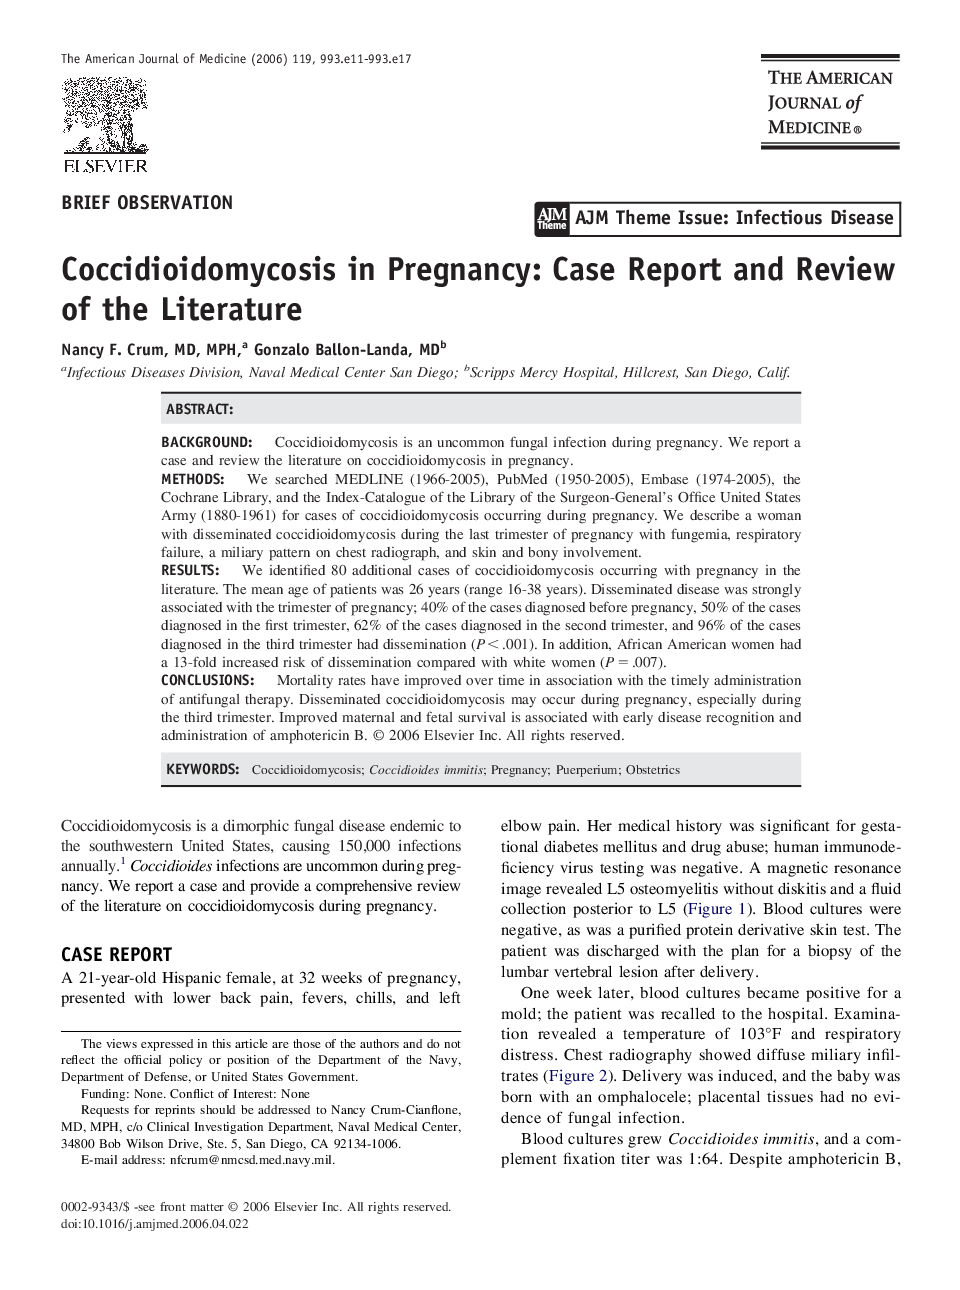 Coccidioidomycosis in Pregnancy: Case Report and Review of the Literature